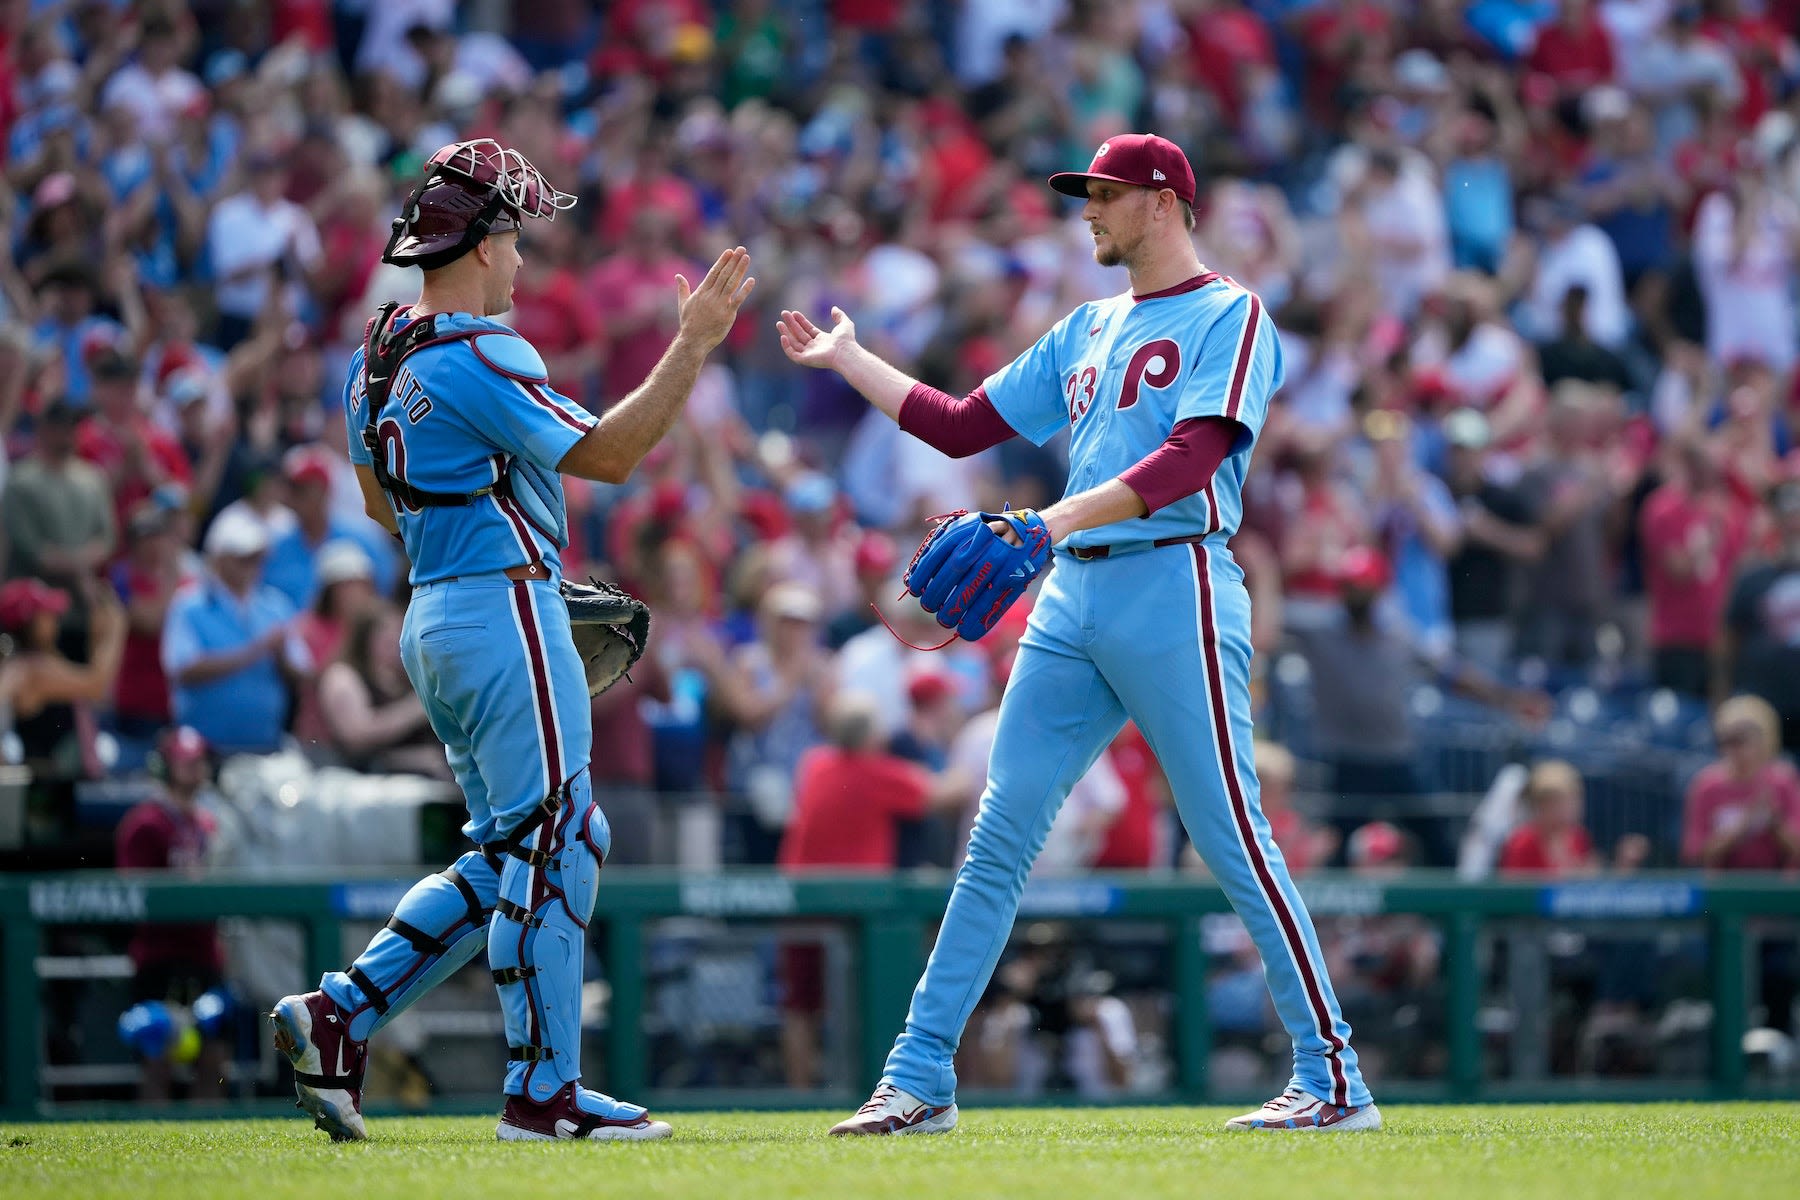 Fueled by postseason failures, Phillies riding high with best record in baseball